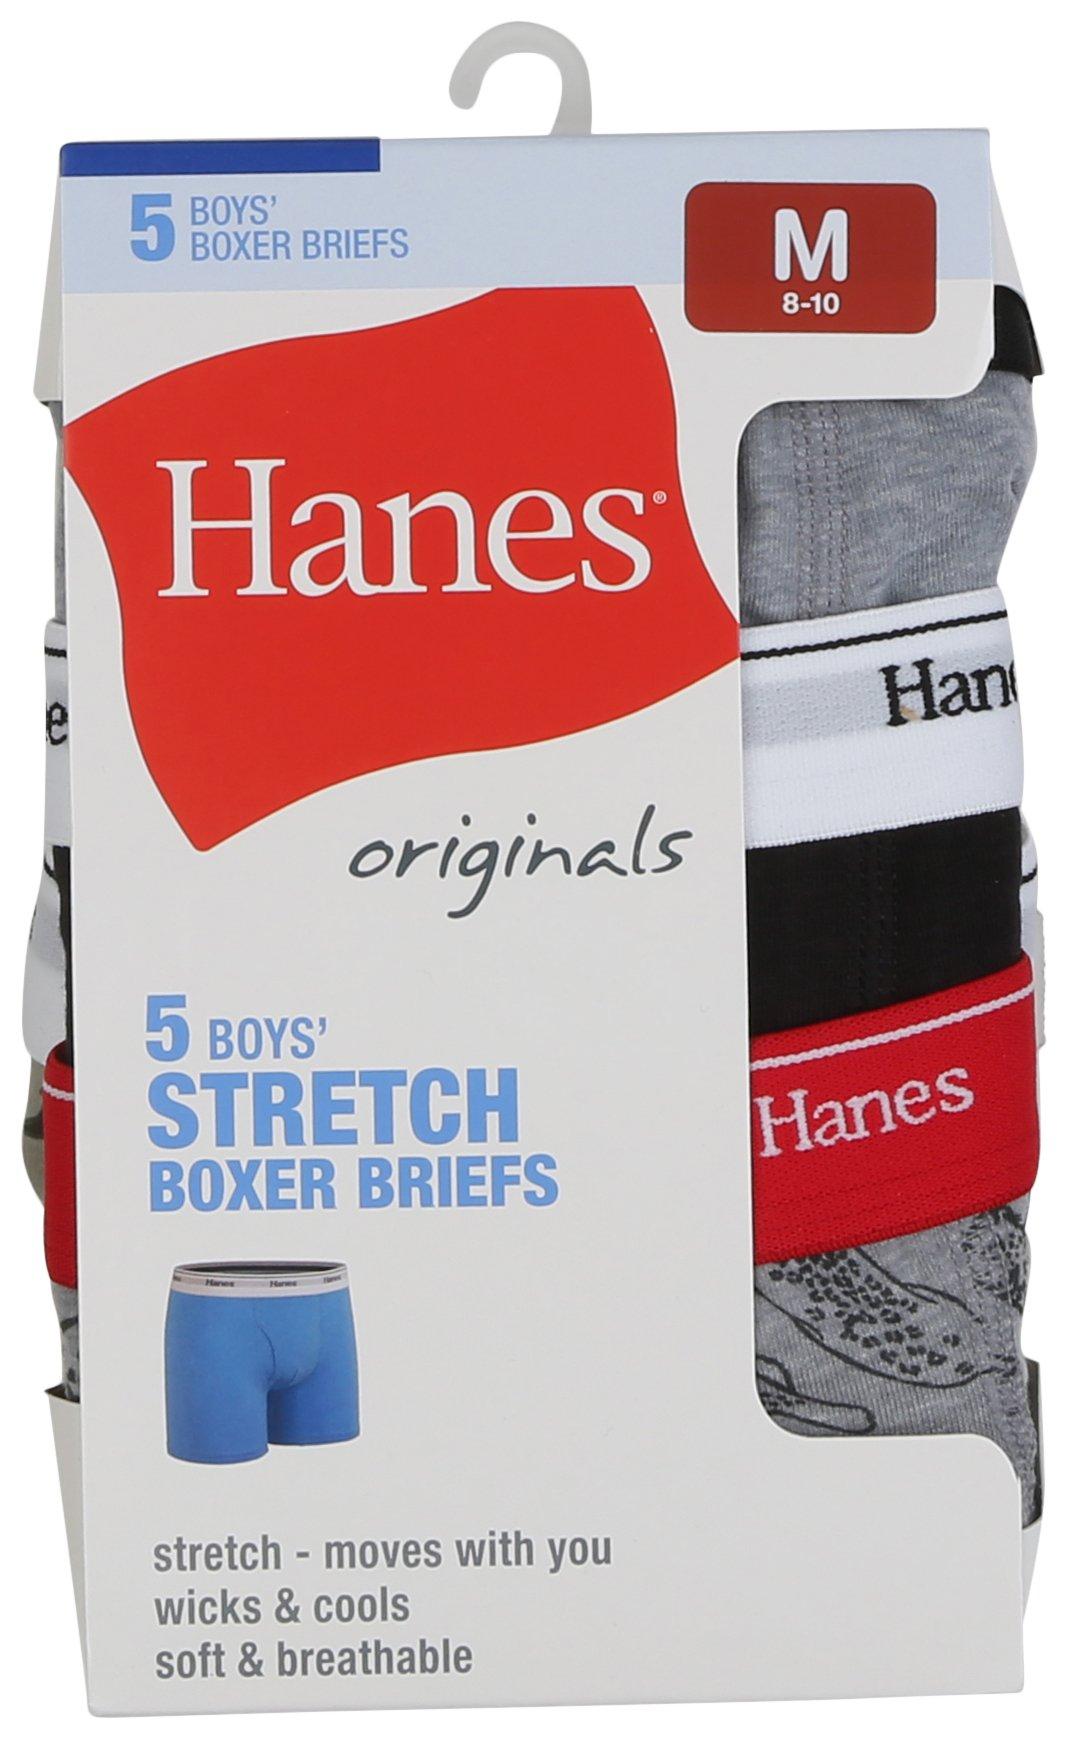 Hanes Toddler Boys Briefs With Comfortsoft Waistband 7 Pk., Toddler Boys  2t-5t, Clothing & Accessories